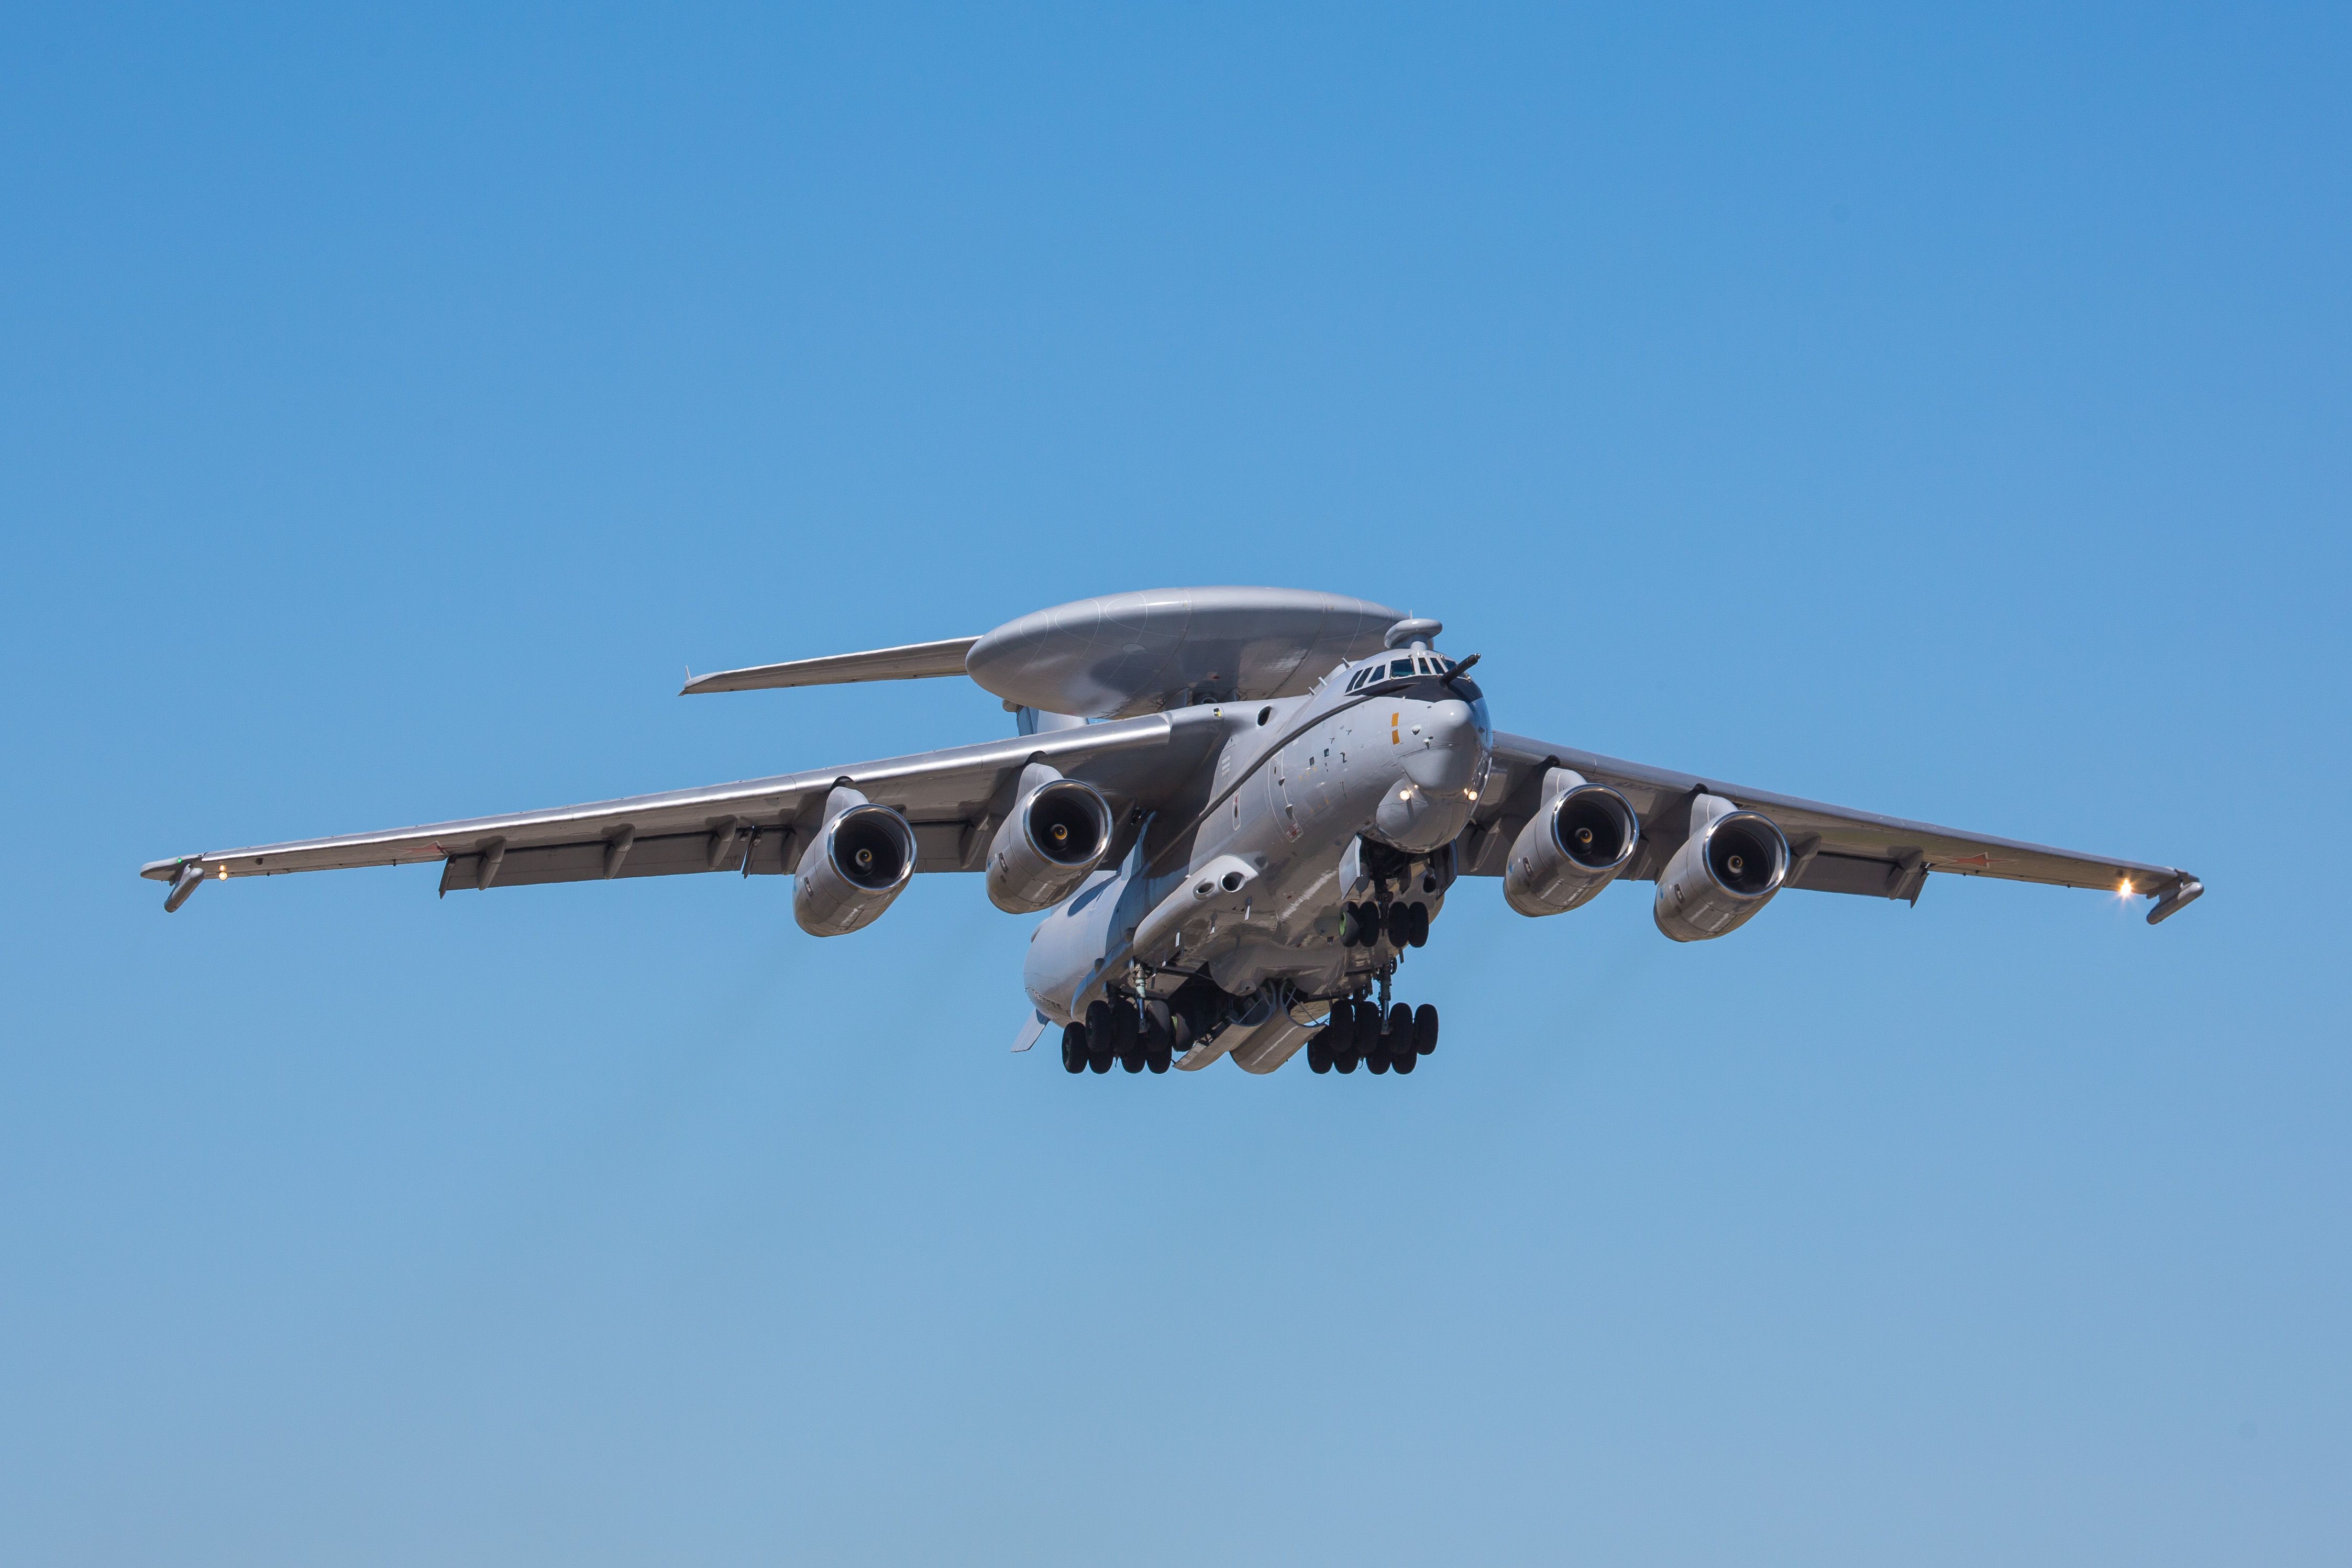 The A-100 Complex Makes Its First Flight With Activated Radar